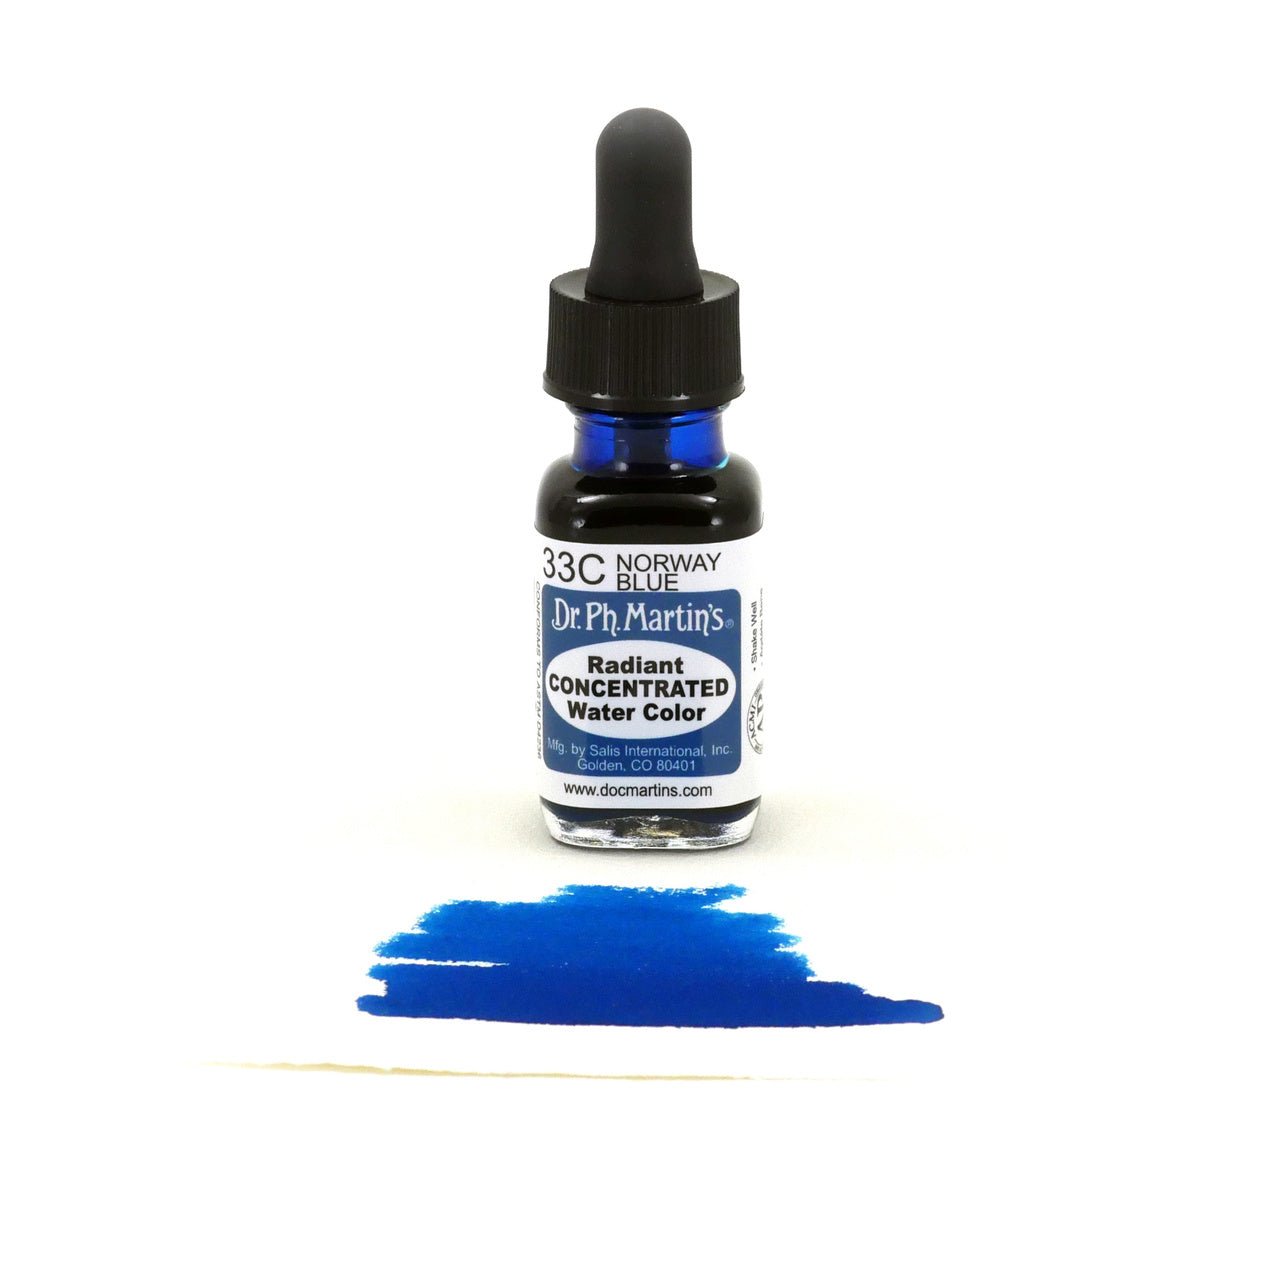 Dr. Ph. Martin's Radiant Watercolor .5 oz - Norway Blue - merriartist.com